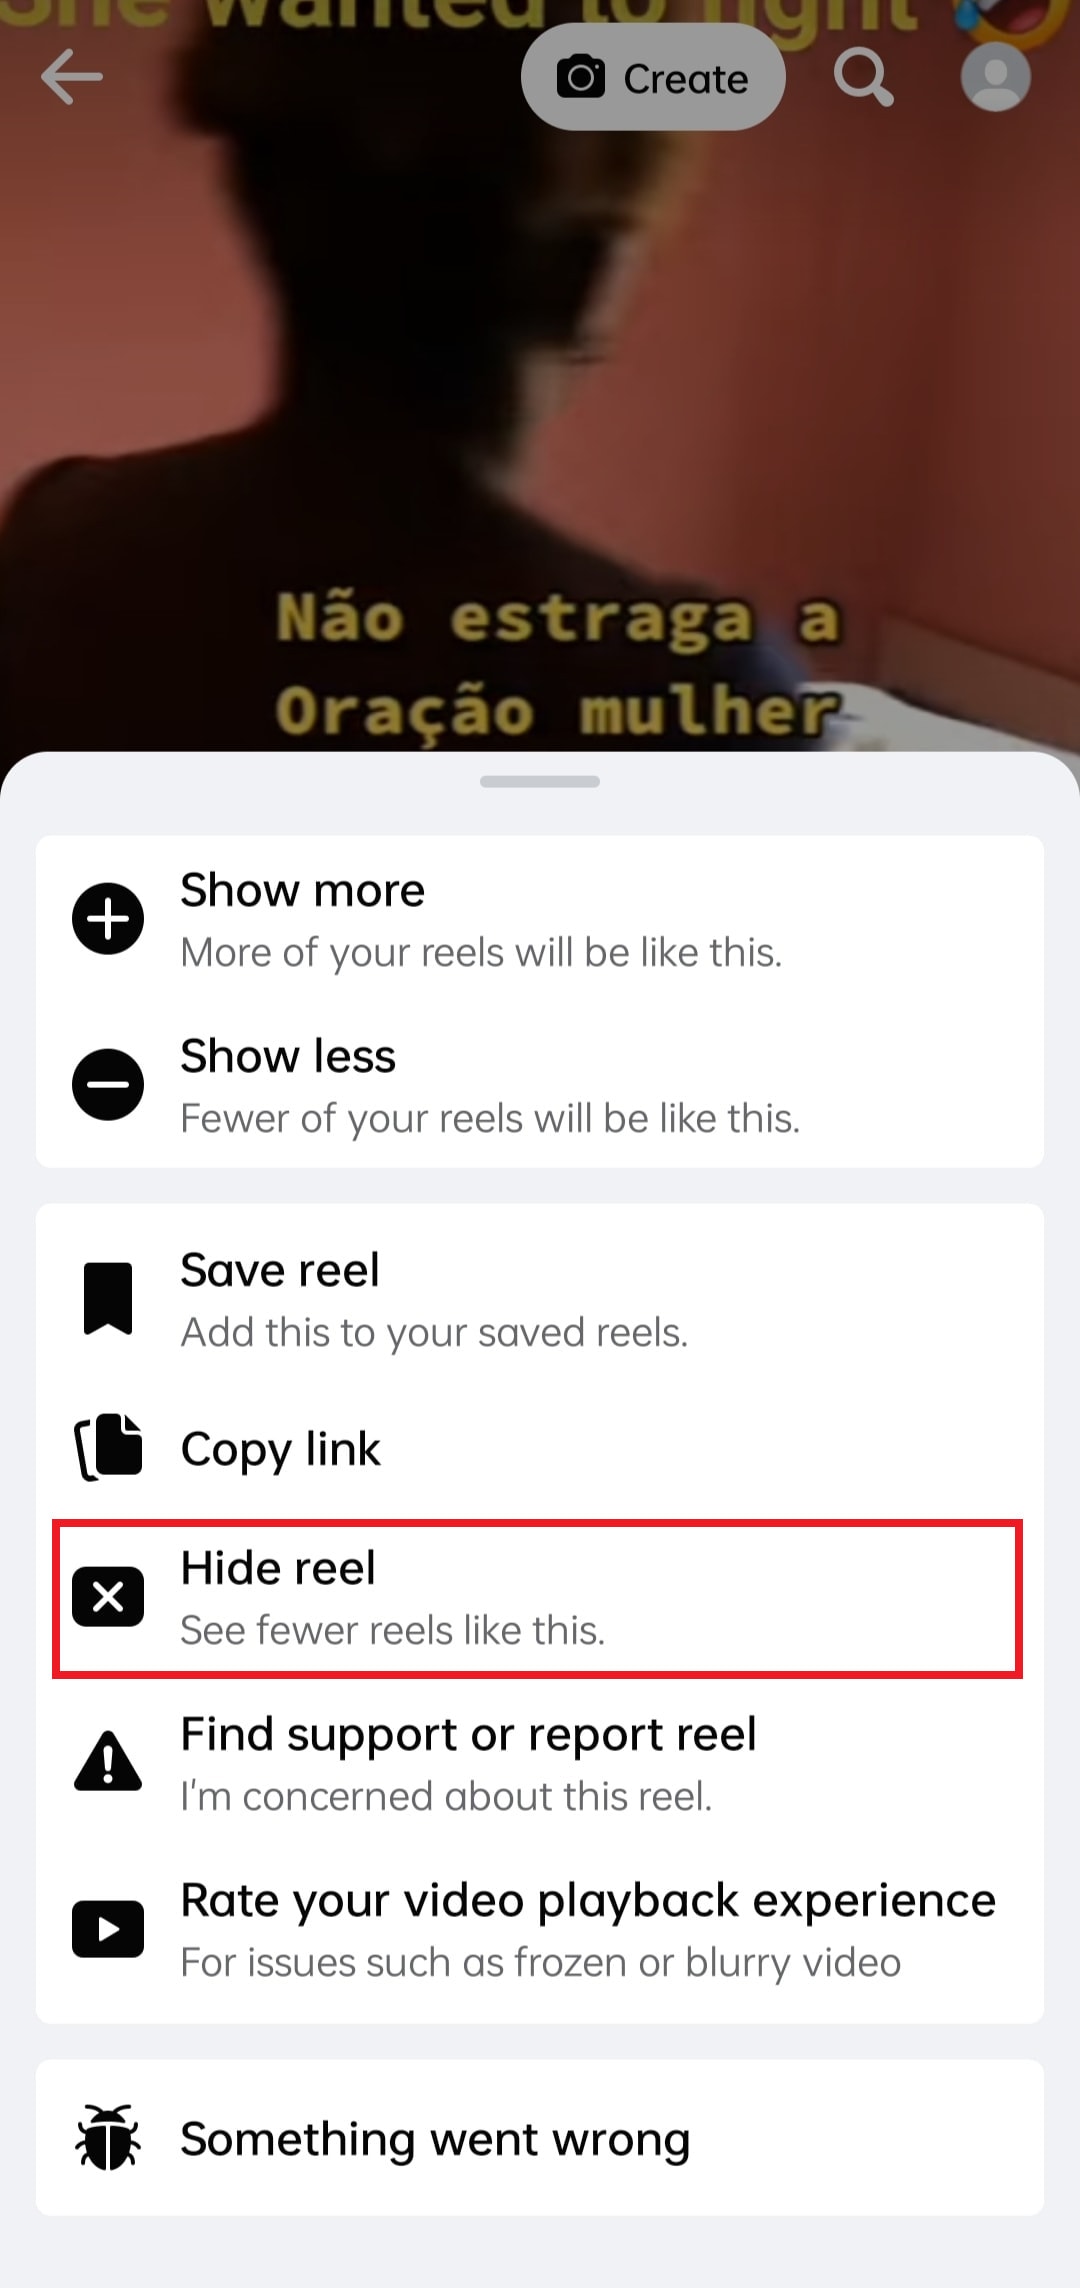 tap on the Hide reel option from the menu